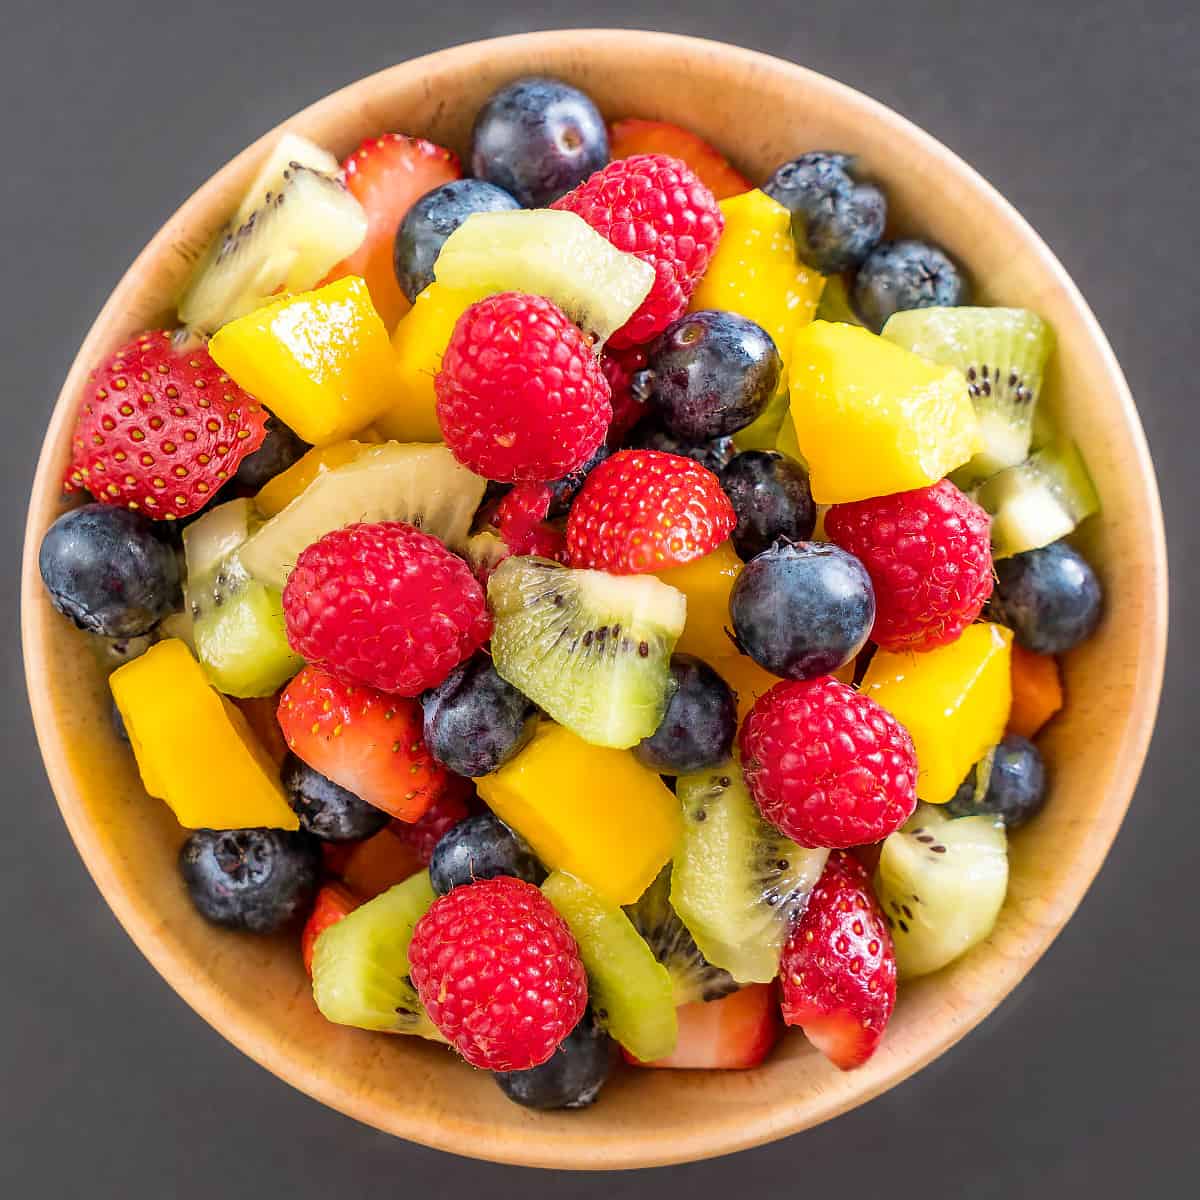 Top view of a bowl with strawberries, blueberries, kiwi, and mango.